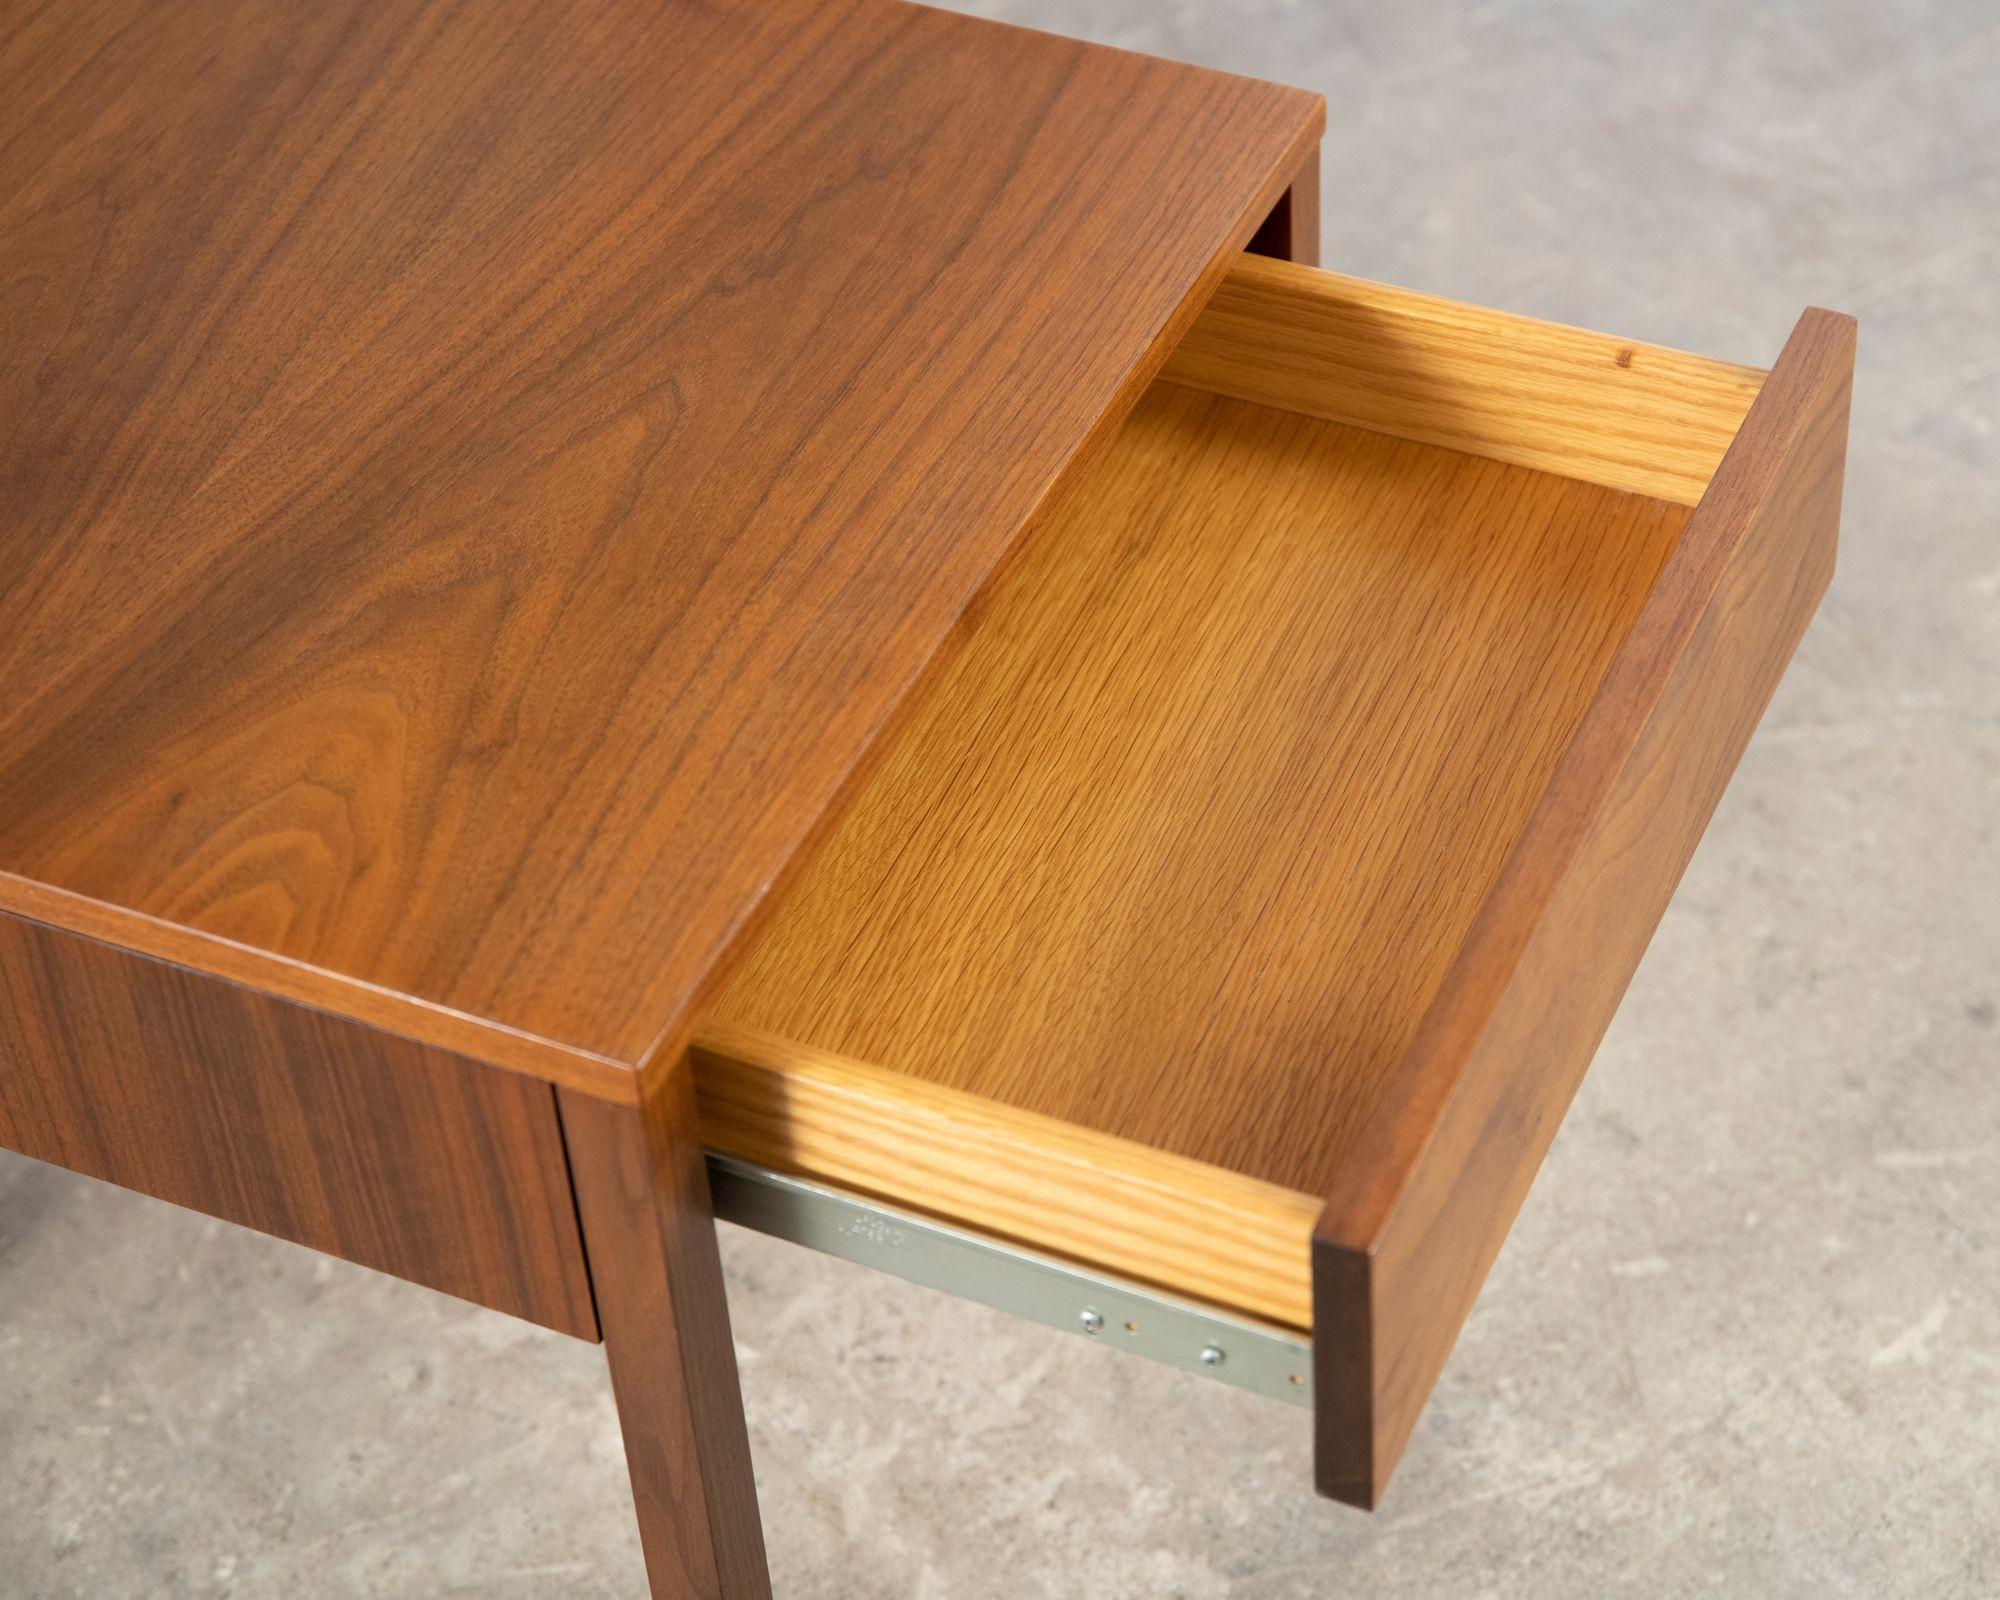 Florence Knoll Nightstands in Walnut for Knoll Associates Early Production 1